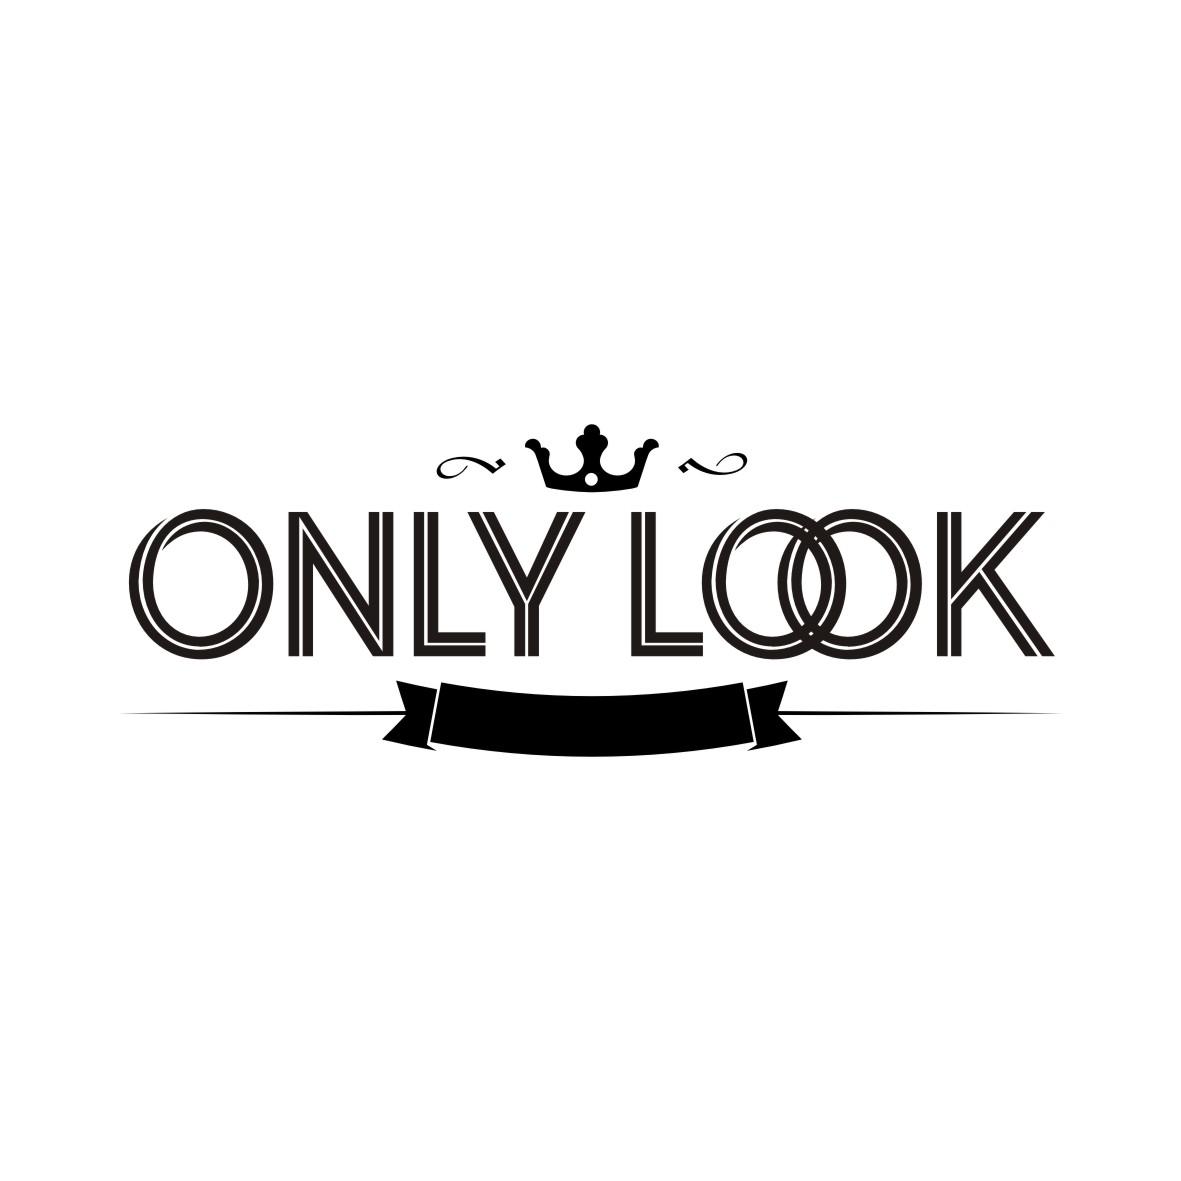 ONLY LOOK